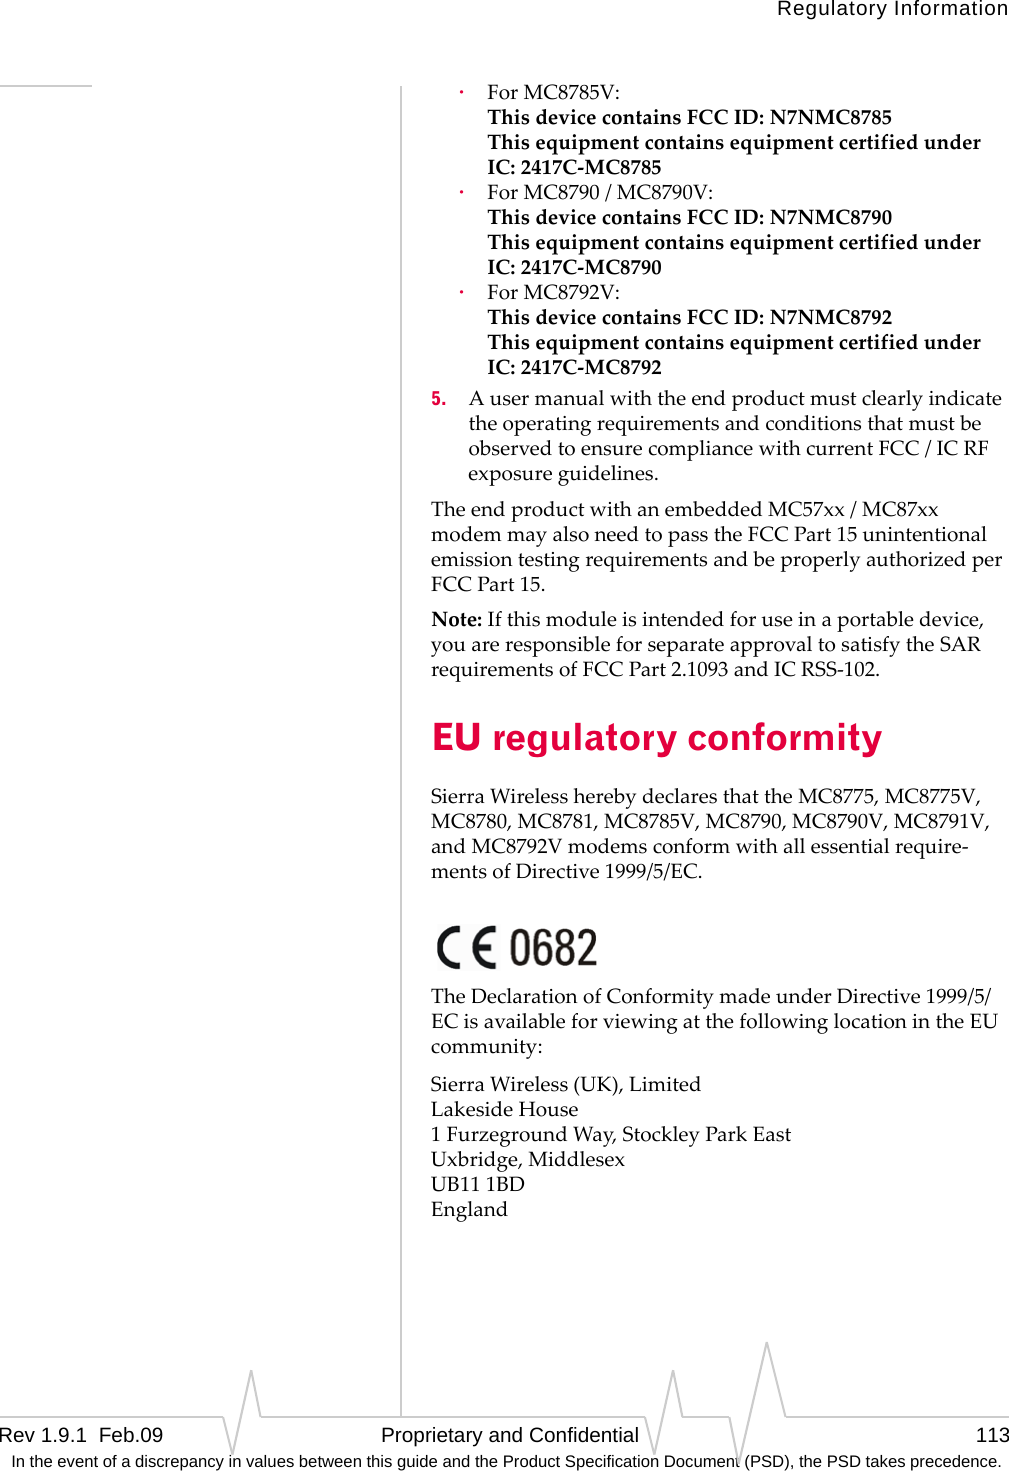 Regulatory InformationRev 1.9.1  Feb.09   Proprietary and Confidential 113 In the event of a discrepancy in values between this guide and the Product Specification Document (PSD), the PSD takes precedence.·ForMC8785V: ThisdevicecontainsFCCID:N7NMC8785 ThisequipmentcontainsequipmentcertifiedunderIC:2417C‐MC8785·ForMC8790/MC8790V: ThisdevicecontainsFCCID:N7NMC8790 ThisequipmentcontainsequipmentcertifiedunderIC:2417C‐MC8790·ForMC8792V: ThisdevicecontainsFCCID:N7NMC8792 ThisequipmentcontainsequipmentcertifiedunderIC:2417C‐MC87925. AusermanualwiththeendproductmustclearlyindicatetheoperatingrequirementsandconditionsthatmustbeobservedtoensurecompliancewithcurrentFCC/ICRFexposureguidelines.TheendproductwithanembeddedMC57xx/MC87xxmodemmayalsoneedtopasstheFCCPart15unintentionalemissiontestingrequirementsandbeproperlyauthorizedperFCCPart15.Note:Ifthismoduleisintendedforuseinaportabledevice,youareresponsibleforseparateapprovaltosatisfytheSARrequirementsofFCCPart2.1093andICRSS‐102.EU regulatory conformitySierraWirelessherebydeclaresthattheMC8775,MC8775V,MC8780,MC8781,MC8785V,MC8790,MC8790V,MC8791V,andMC8792Vmodemsconformwithallessentialrequire‐mentsofDirective1999/5/EC.TheDeclarationofConformitymadeunderDirective1999/5/ECisavailableforviewingatthefollowinglocationintheEUcommunity:SierraWireless(UK),Limited LakesideHouse 1FurzegroundWay,StockleyParkEast Uxbridge,Middlesex UB111BD England